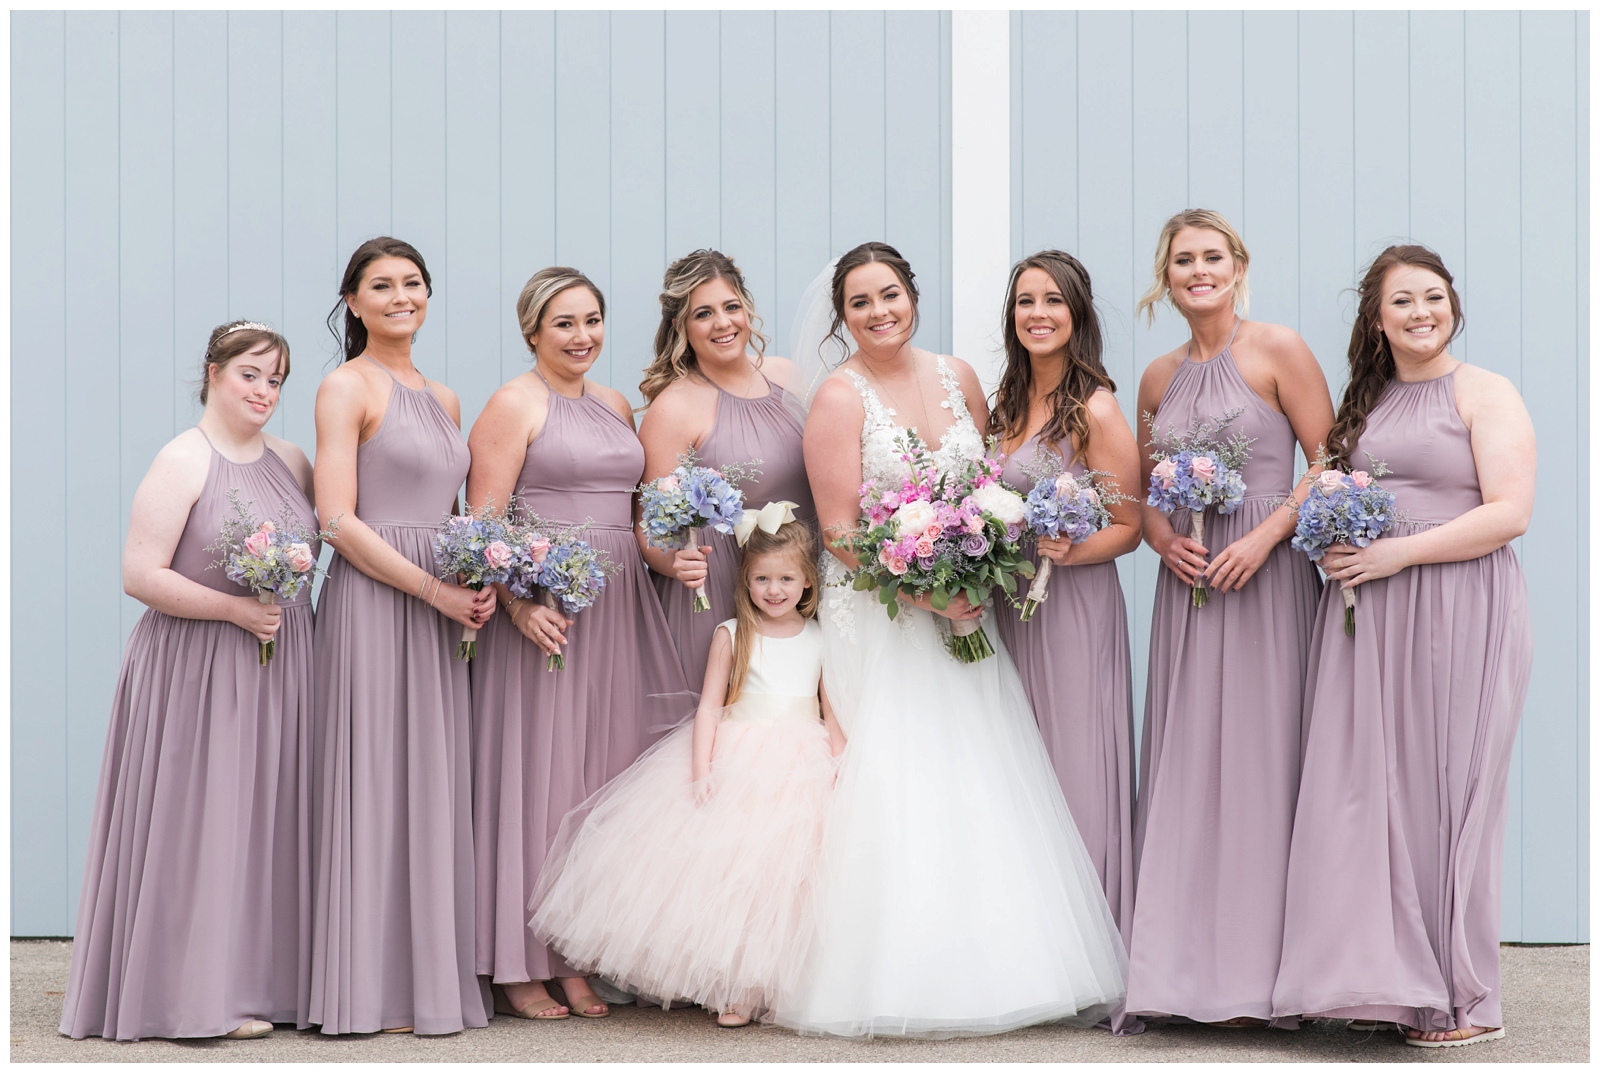 seven bridesmaids in pale pink dresses with flower girl and bride pose on Pretty Prairie Farms